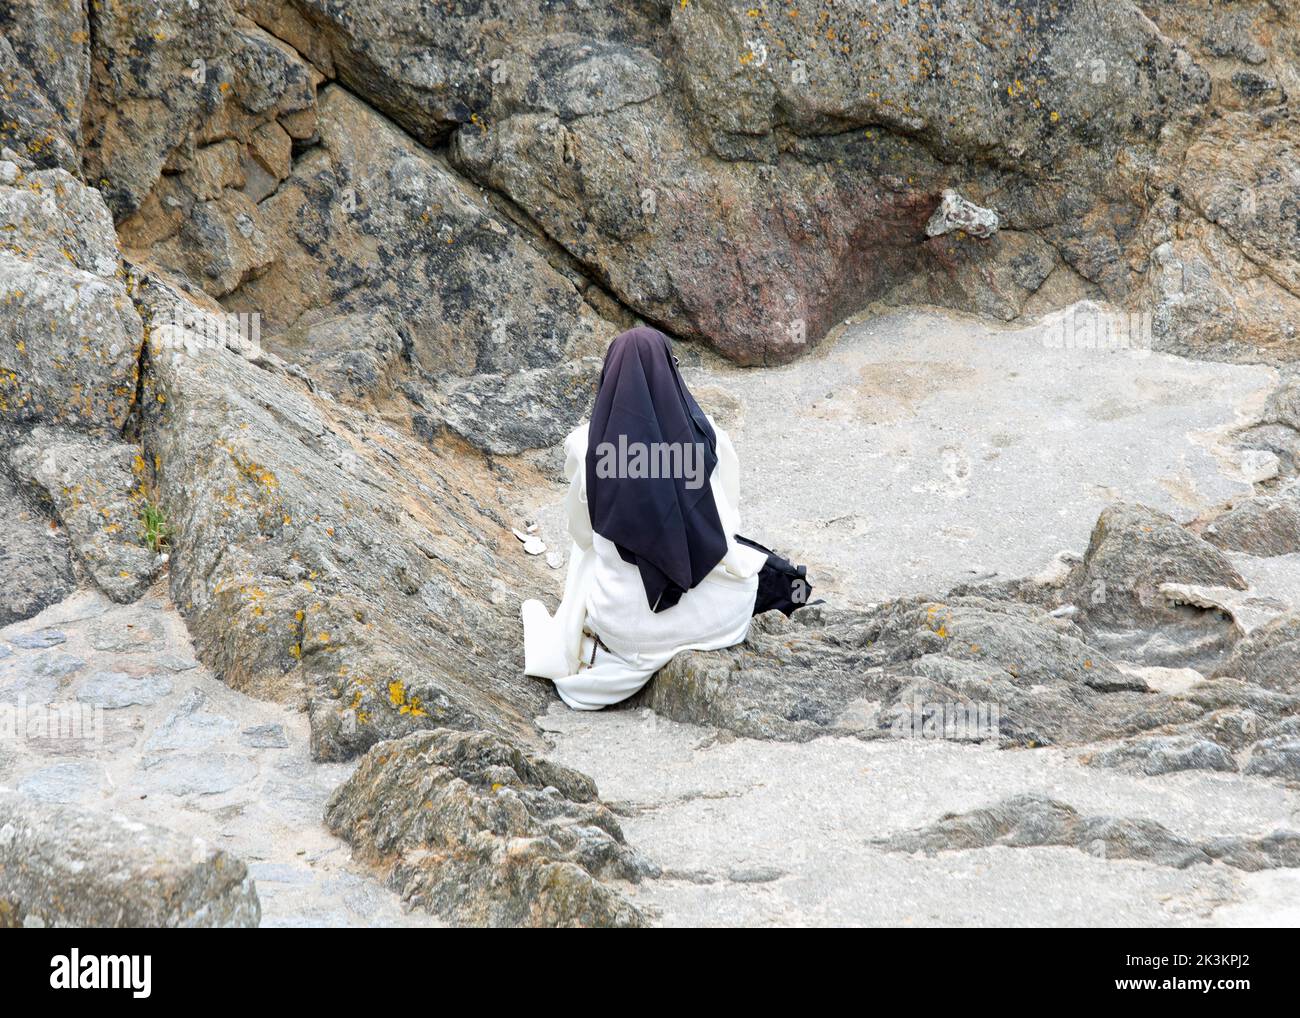 Solitary nun in prayer dressed in a monastic habit and a black veil on her head Stock Photo